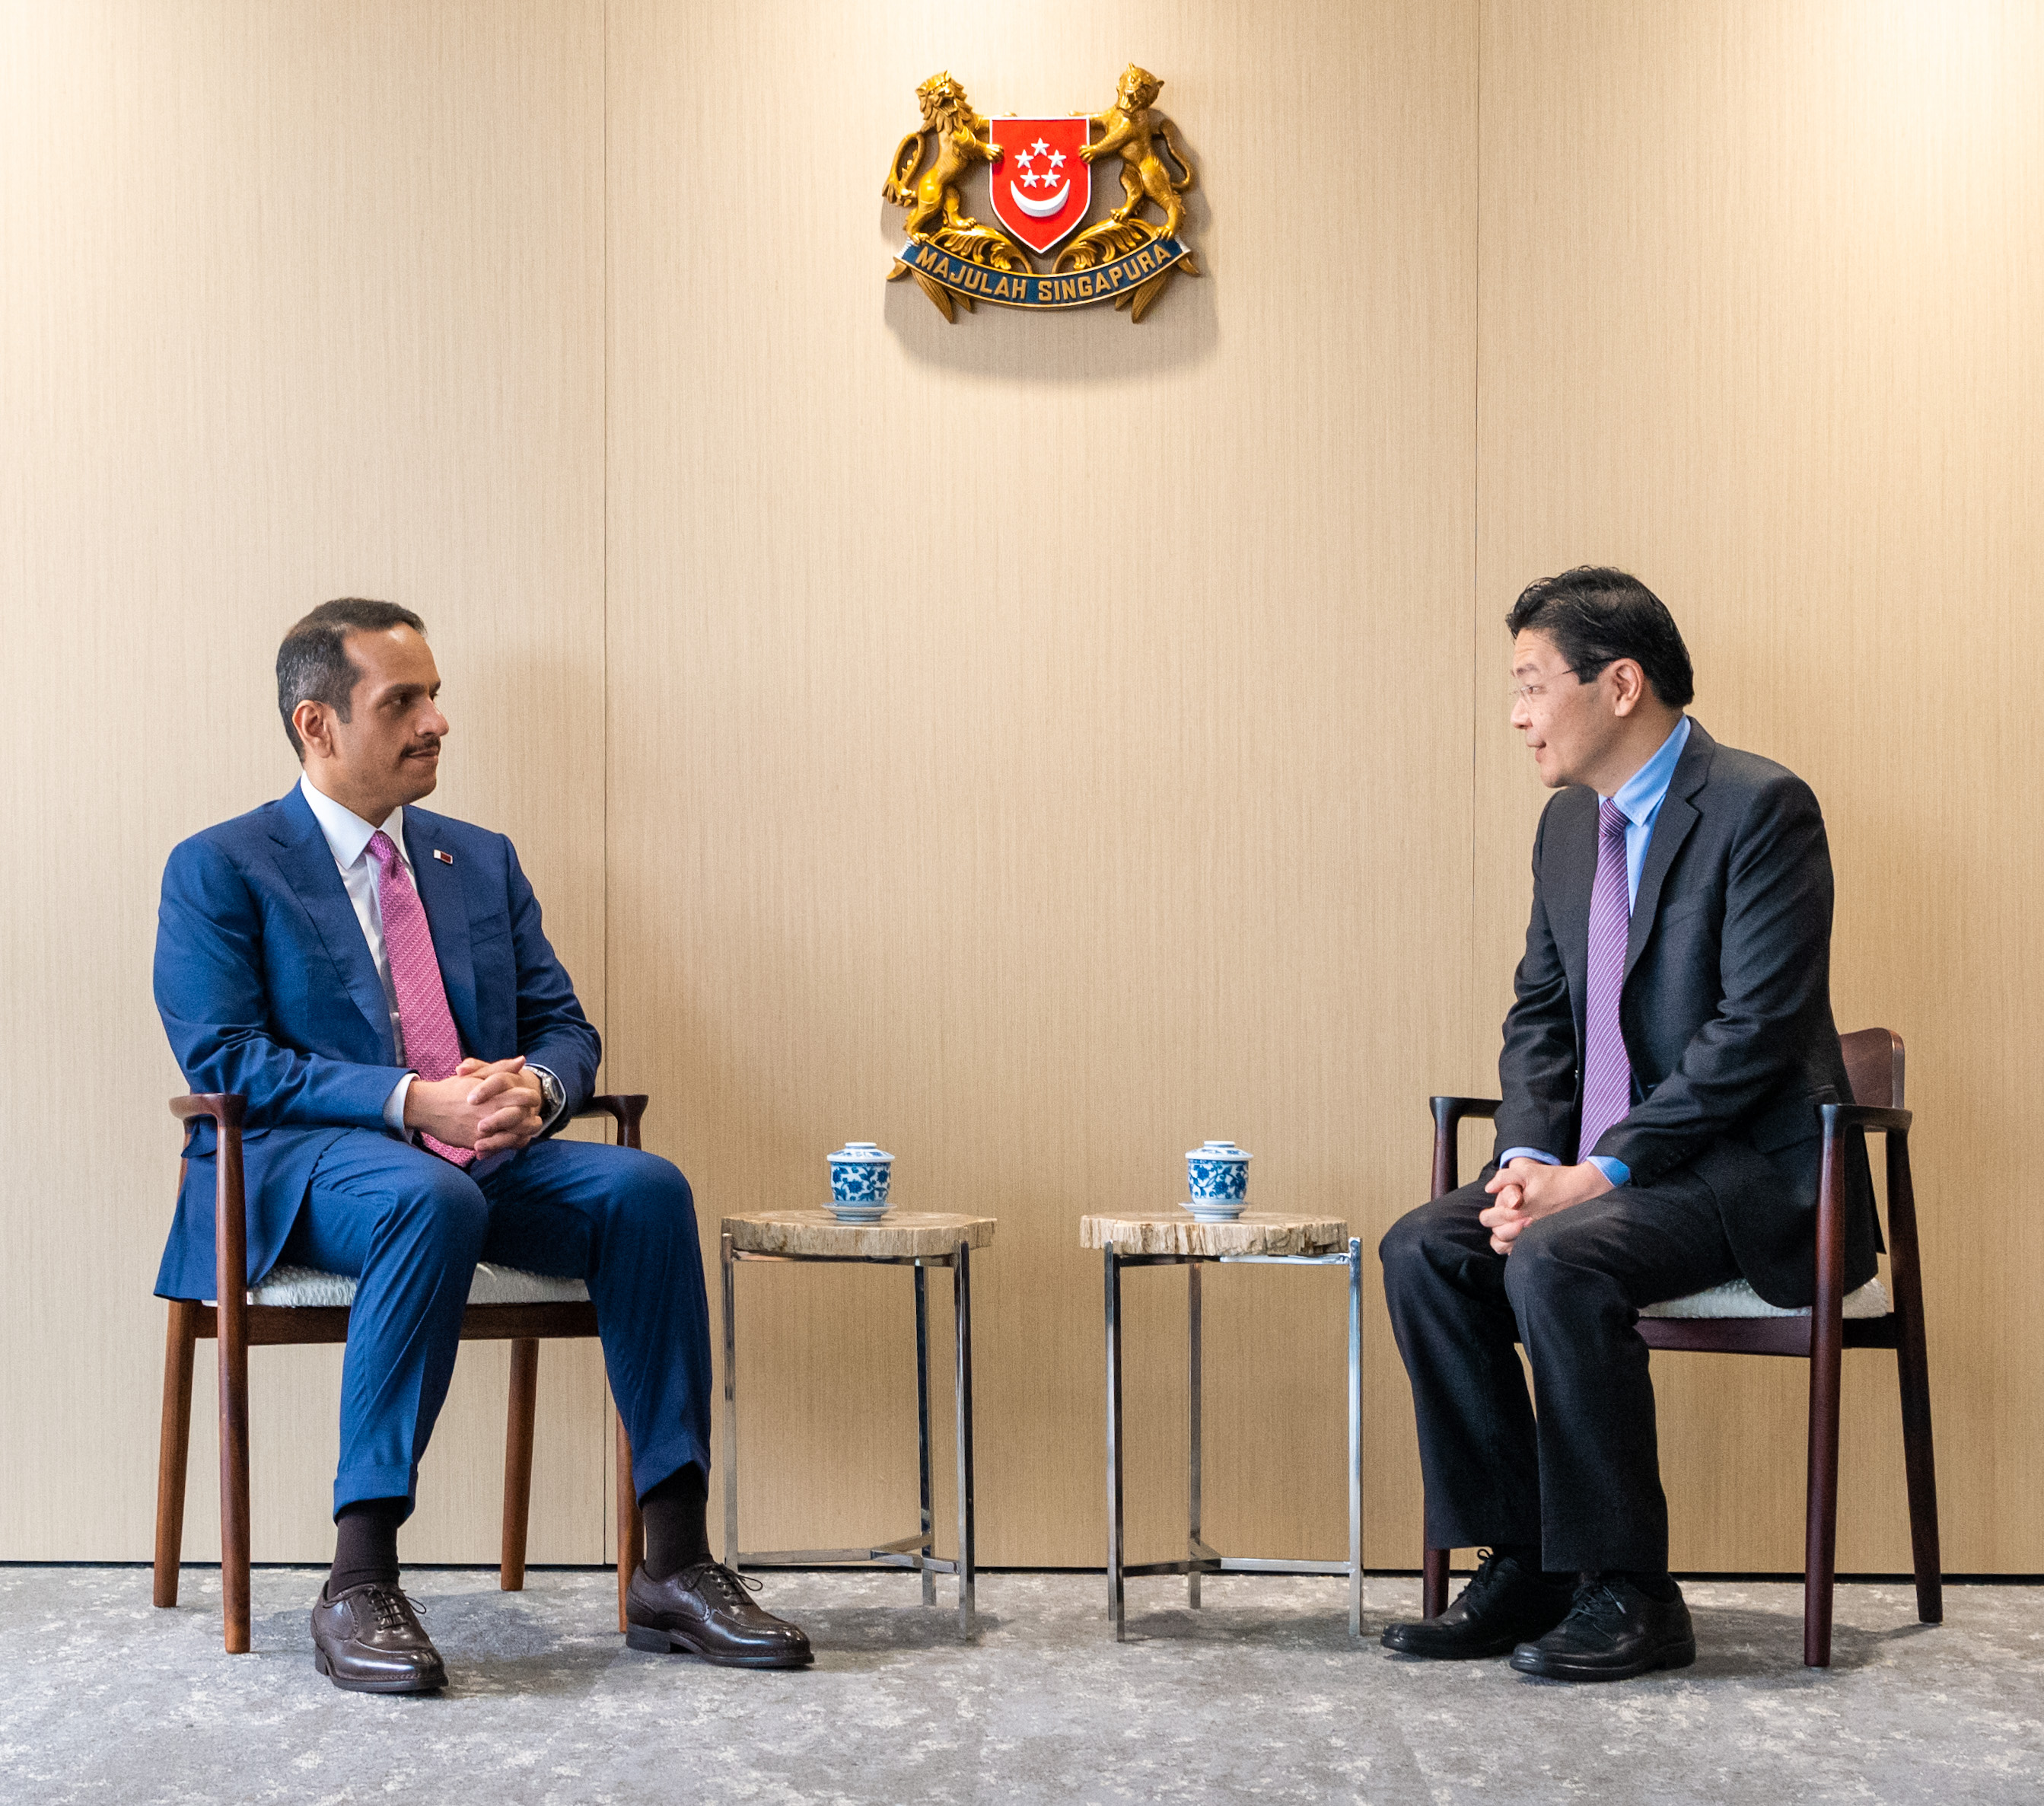 Deputy Prime Minister and Minister of Foreign Affairs Meets Deputy Prime Minister and Minister of Finance in Singapore